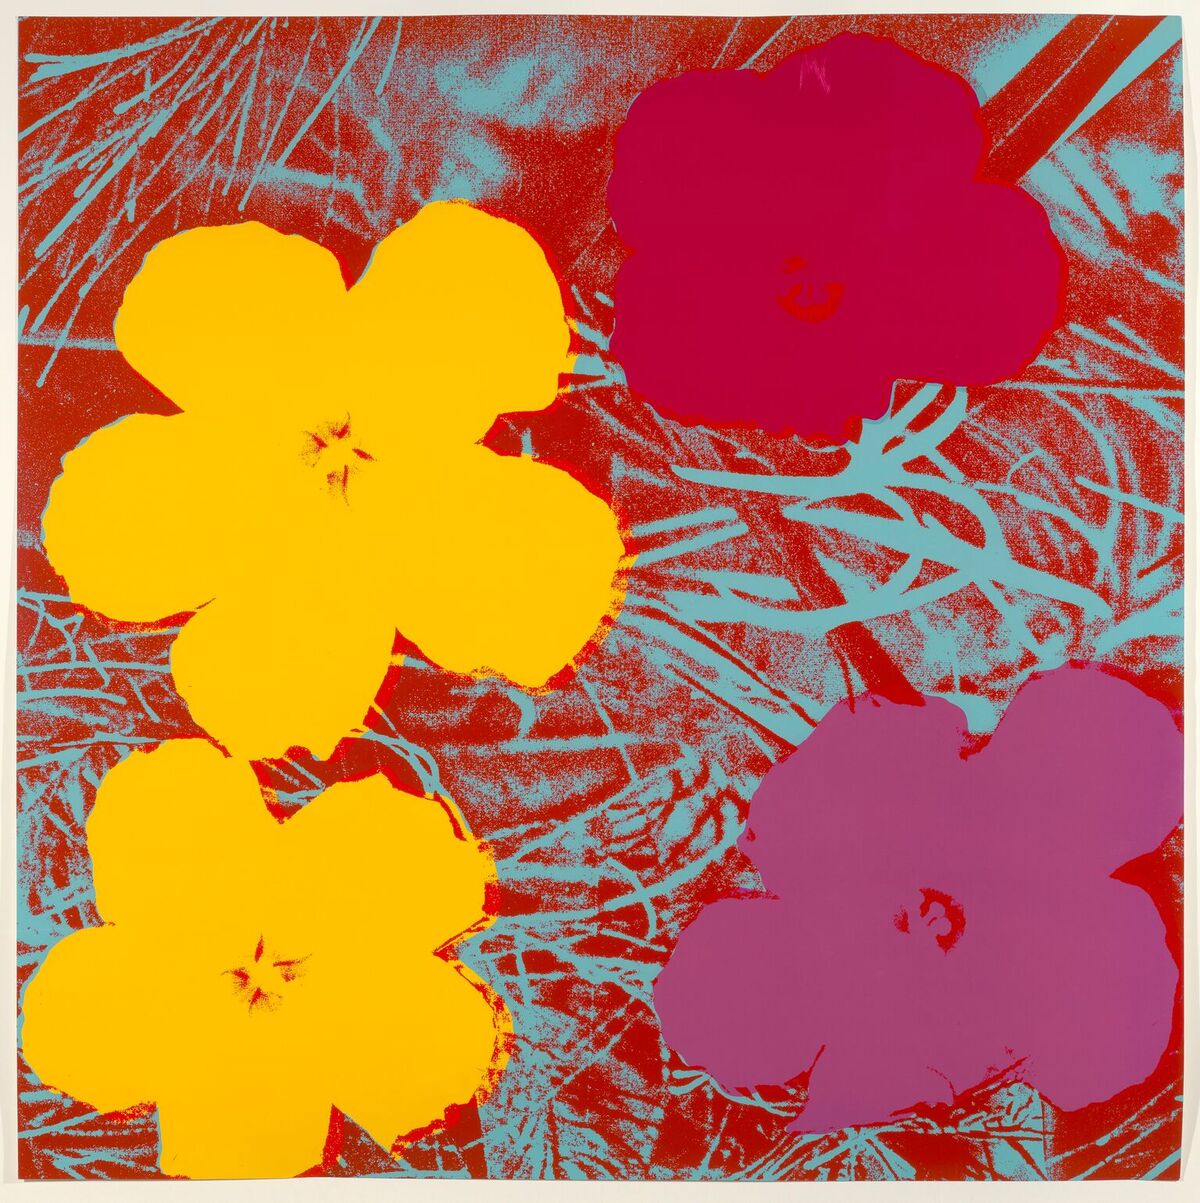 Flowers, 1967, © 2017 The Andy Warhol Foundation for the Visual Arts, Inc. / Artists Rights Society (ARS), New York. Andy Warhol (American, 1928-1987) Flowers, c.1967 color silkscreen on paper 36 1/16 x 36 in. (91.6 x 91.5 cm) Williams College Museum of Art, Williamstown, MA: Gift of Tennyson and Fern Schad, Class of 1952 (84.17.1)